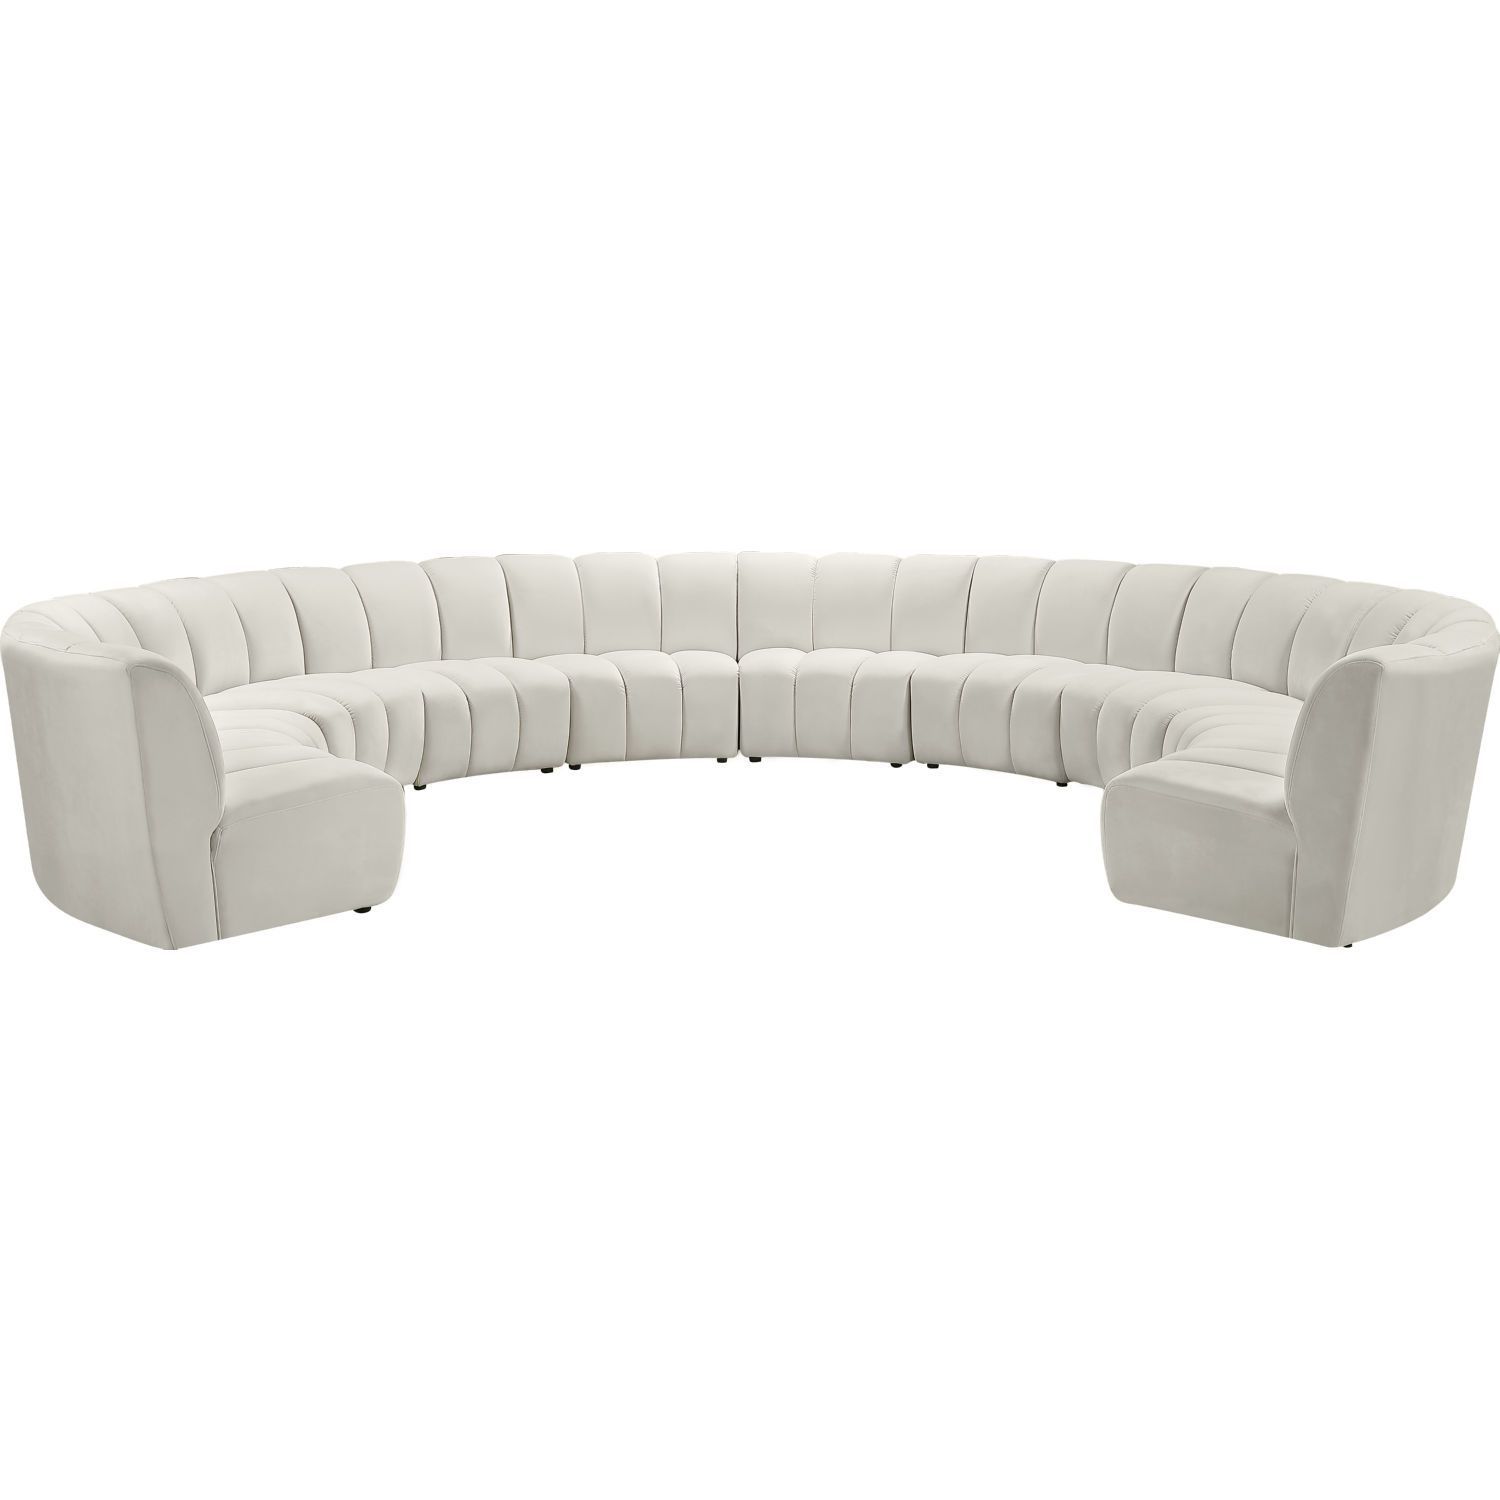 Meridian Furniture 638cream 10pc Infinity 10 Piece Modular Sectional Pertaining To Cream Velvet Modular Sectionals (View 14 of 20)